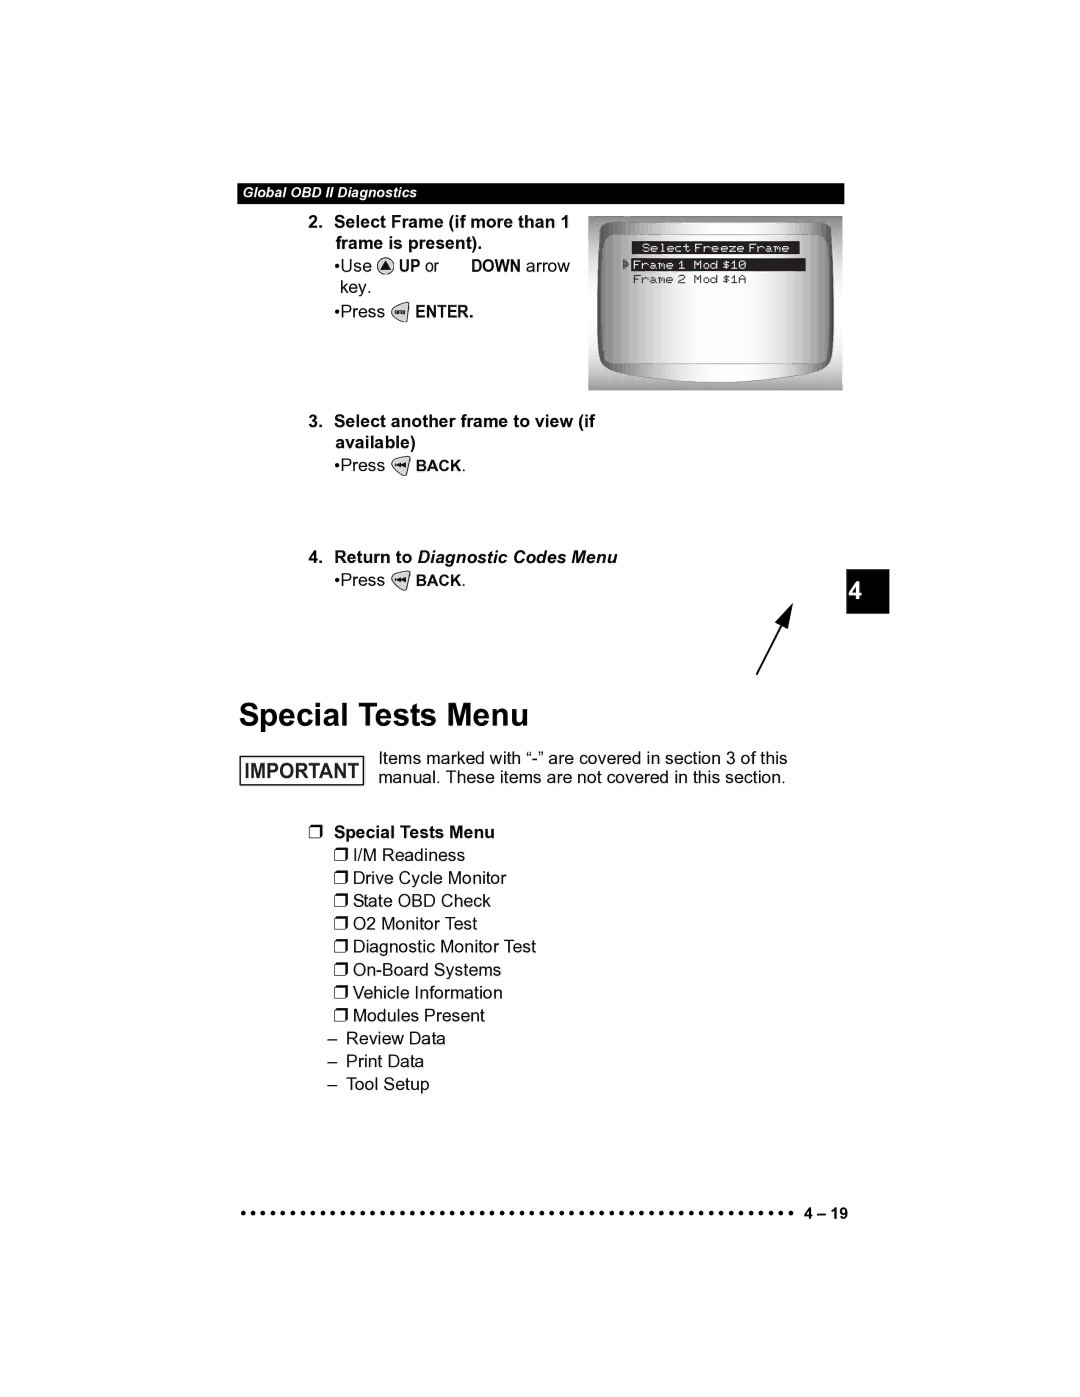 Actron CP9185 manual Special Tests Menu, Select another frame to view if available 